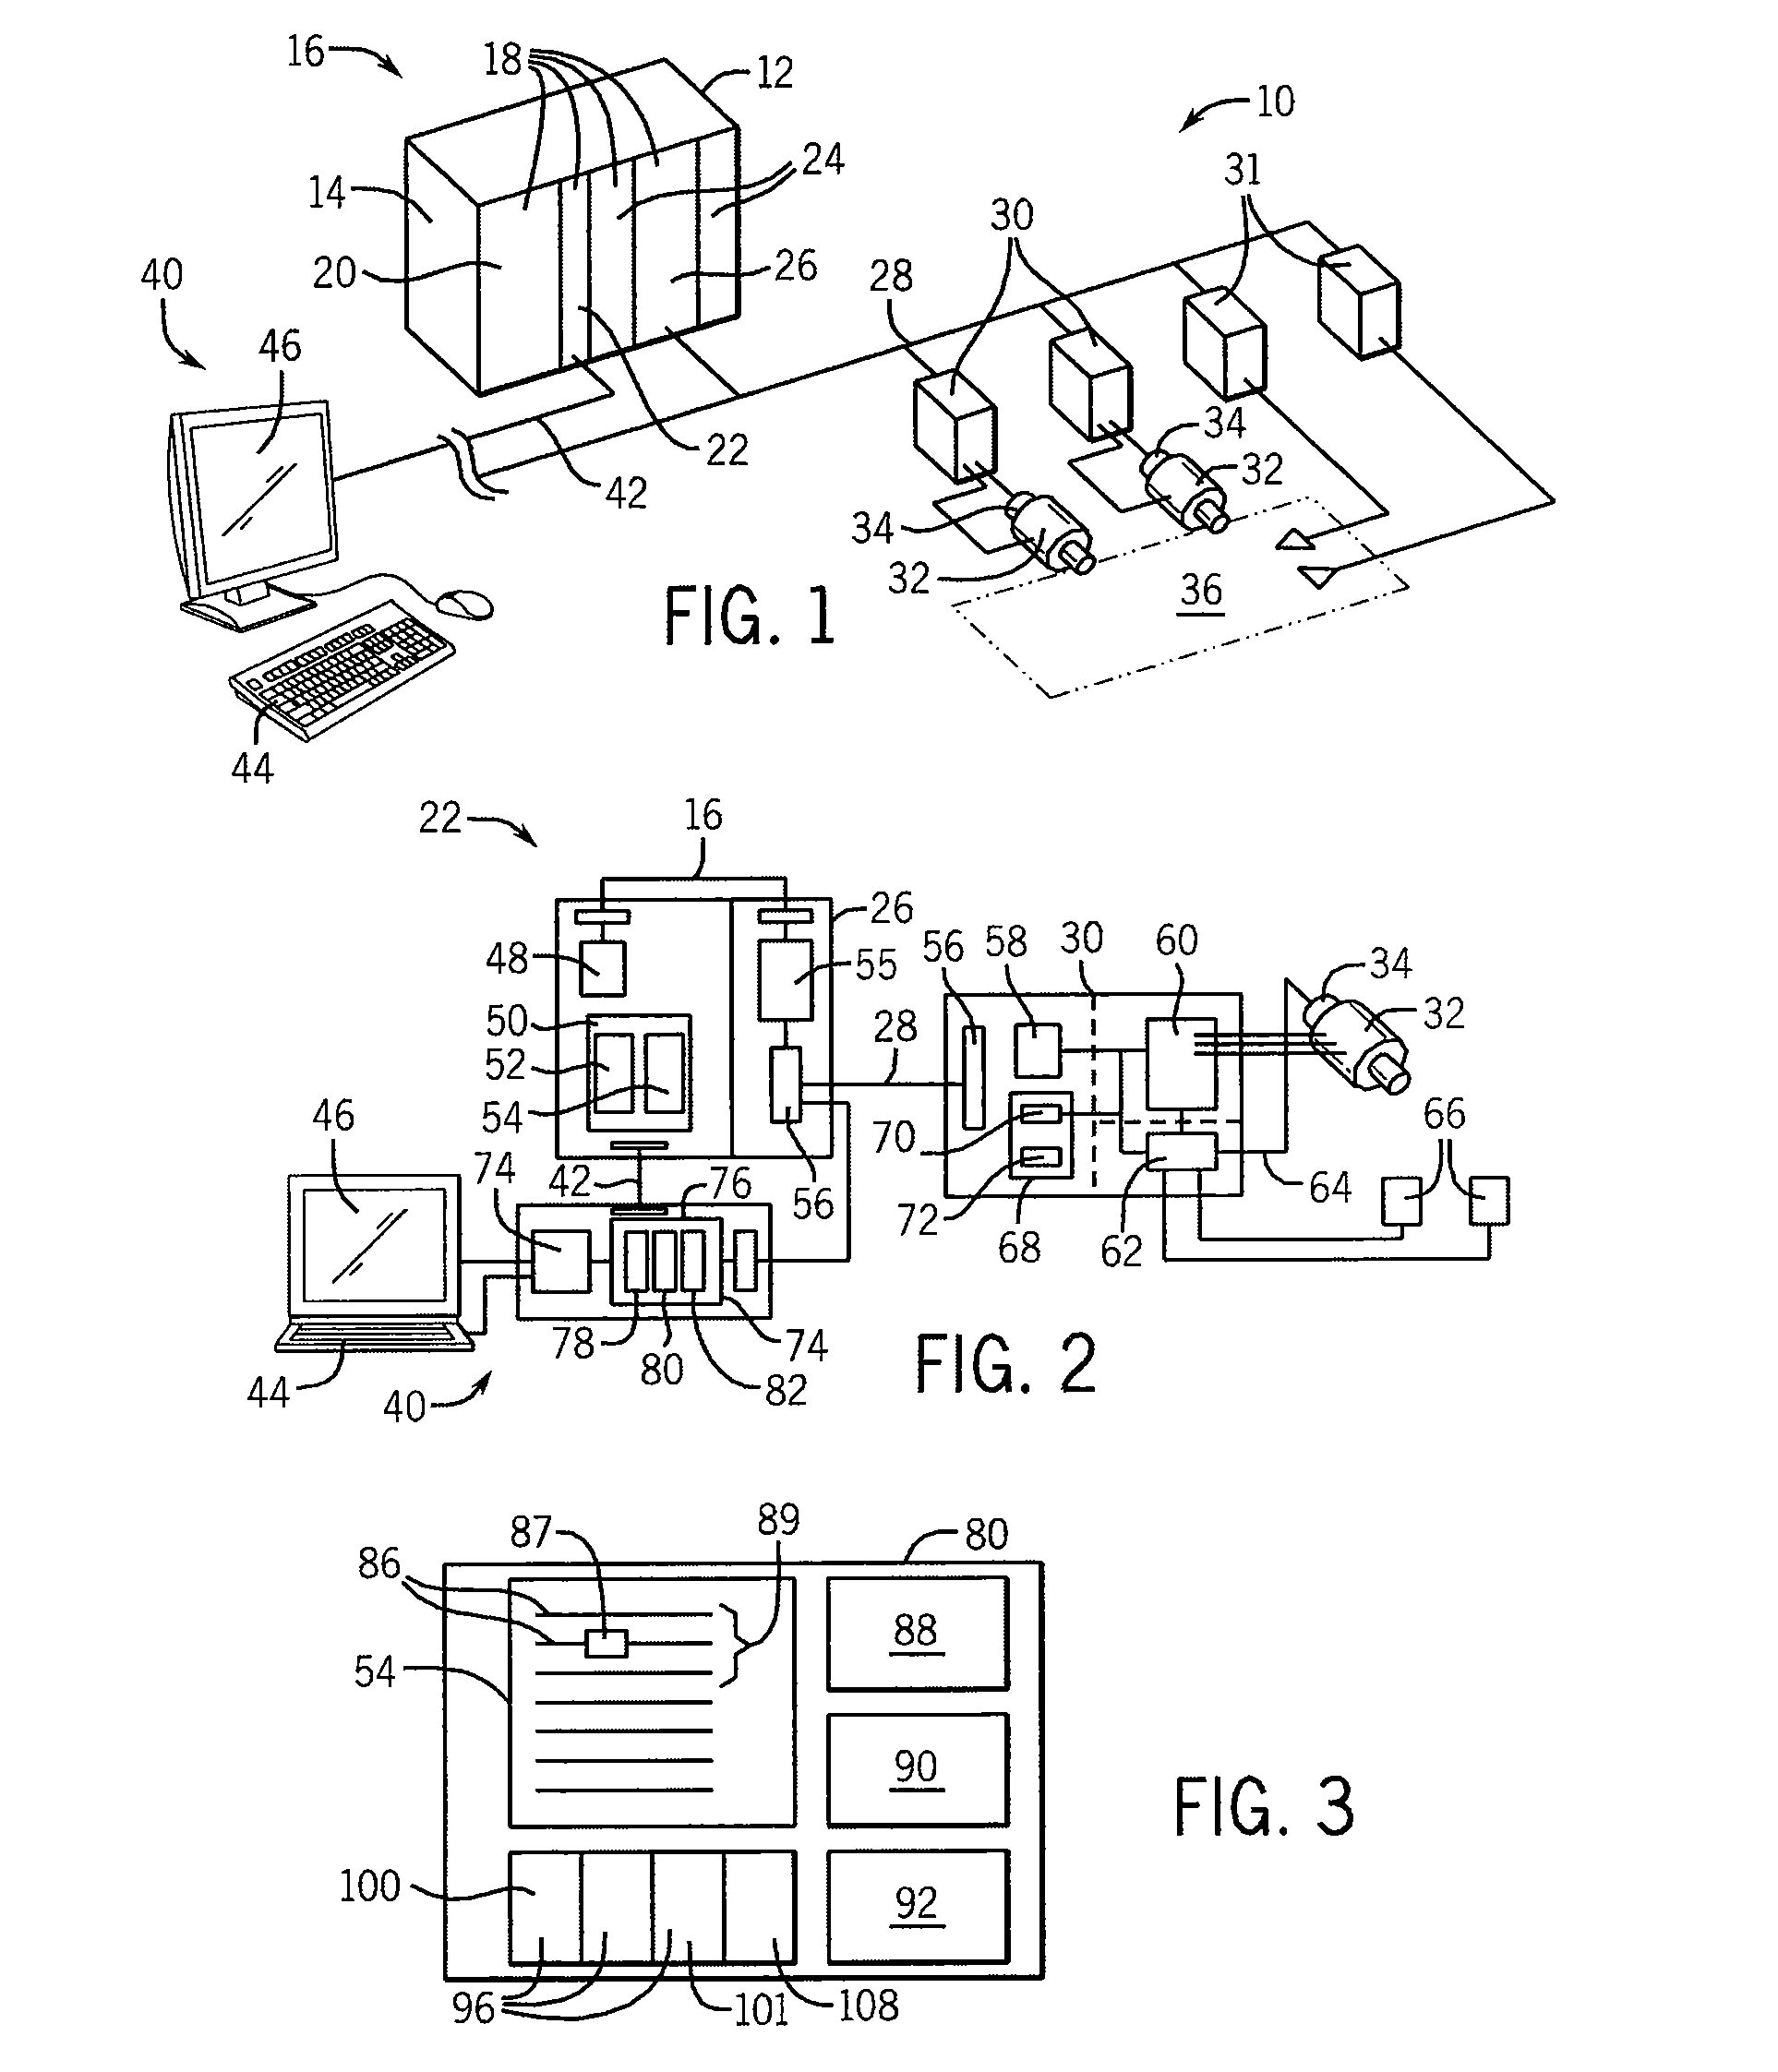 Industrial Control System with Distributed Motion Planning